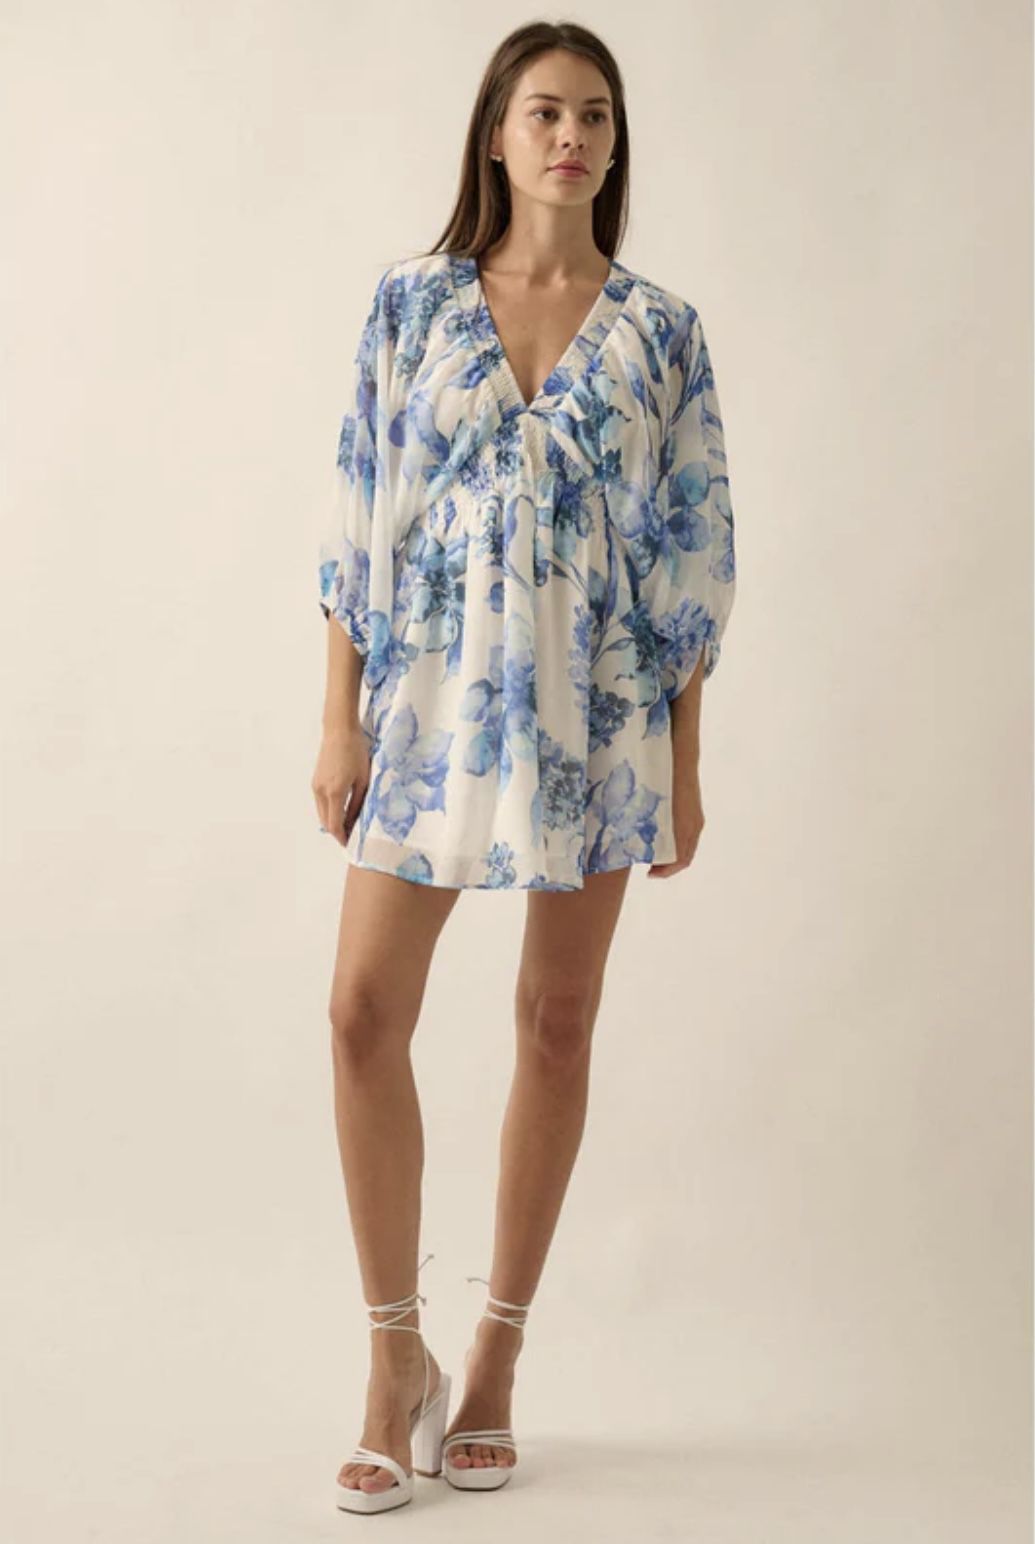 New Promesca Blue and White Floral Dress